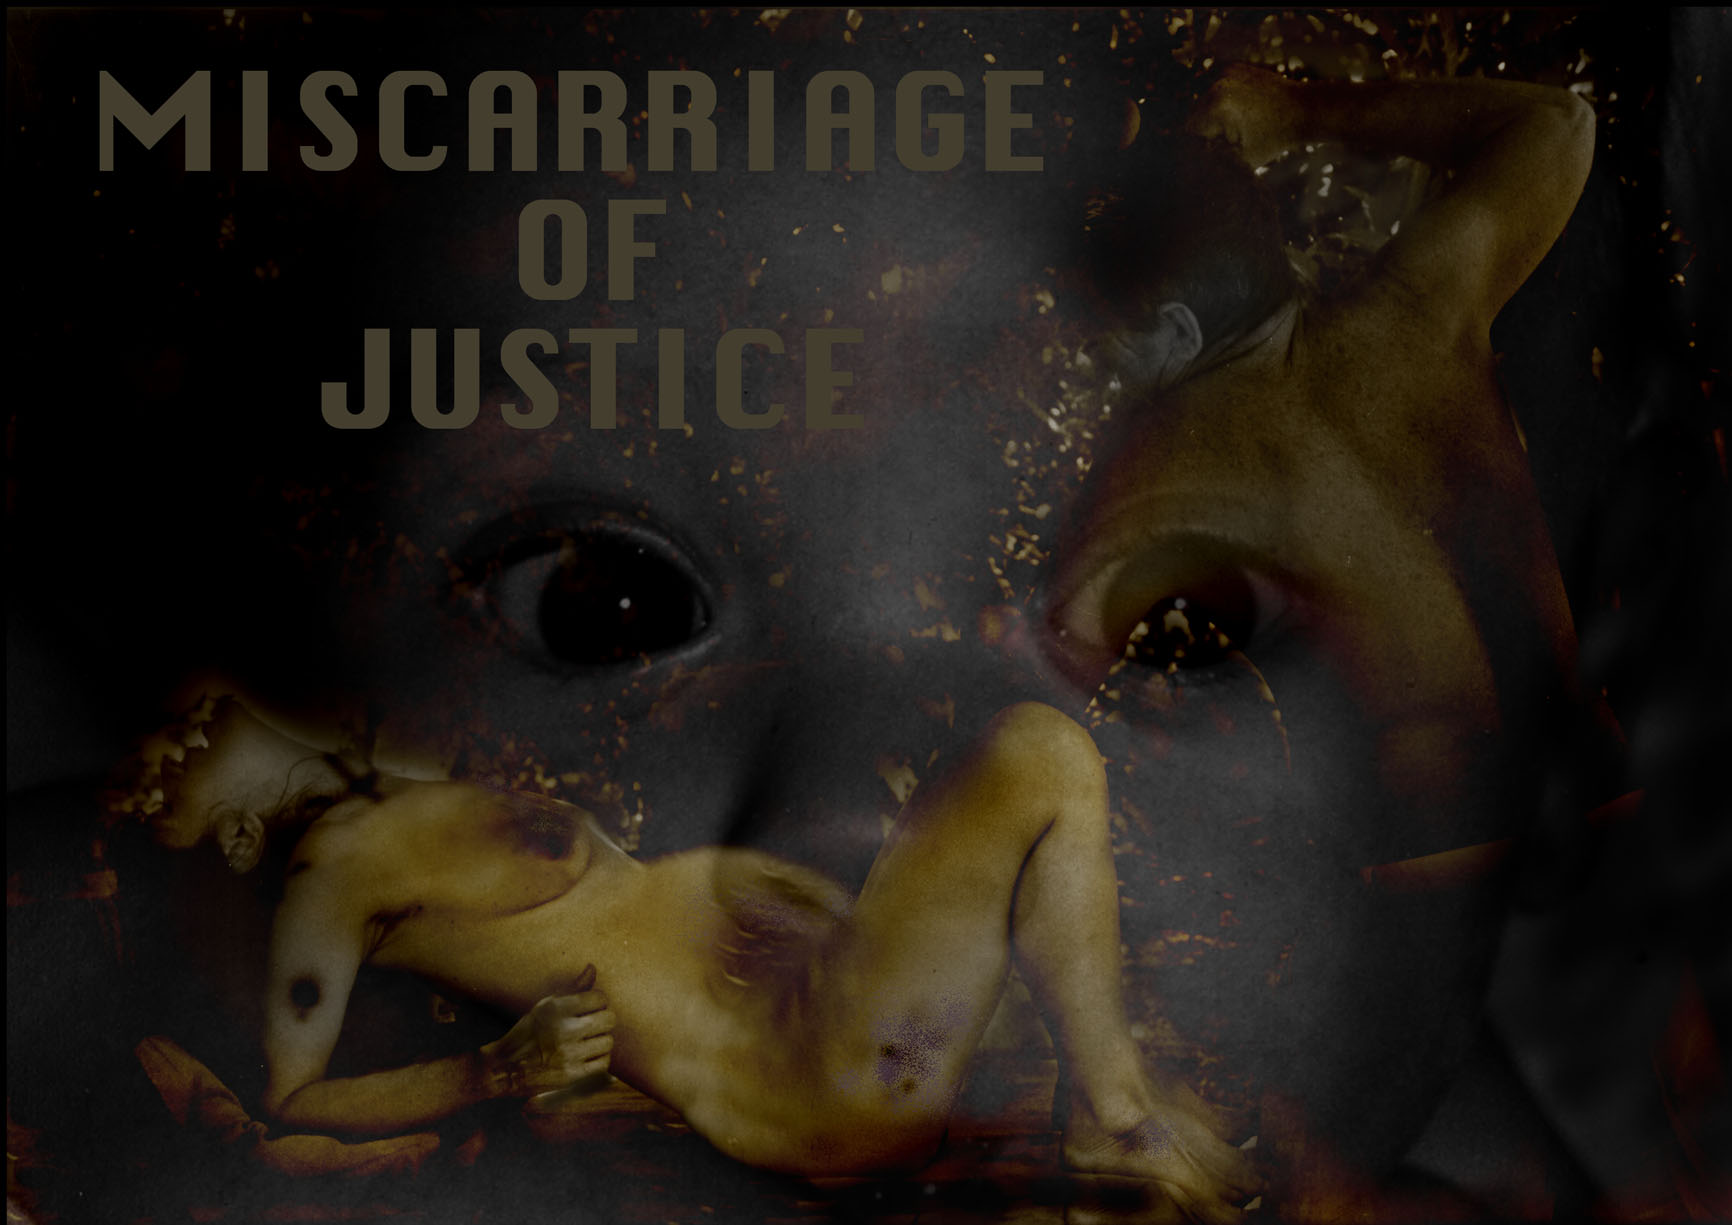 Miscarriage of Justice: digital image exploring domestic violence against women and its composite abusive judicial system